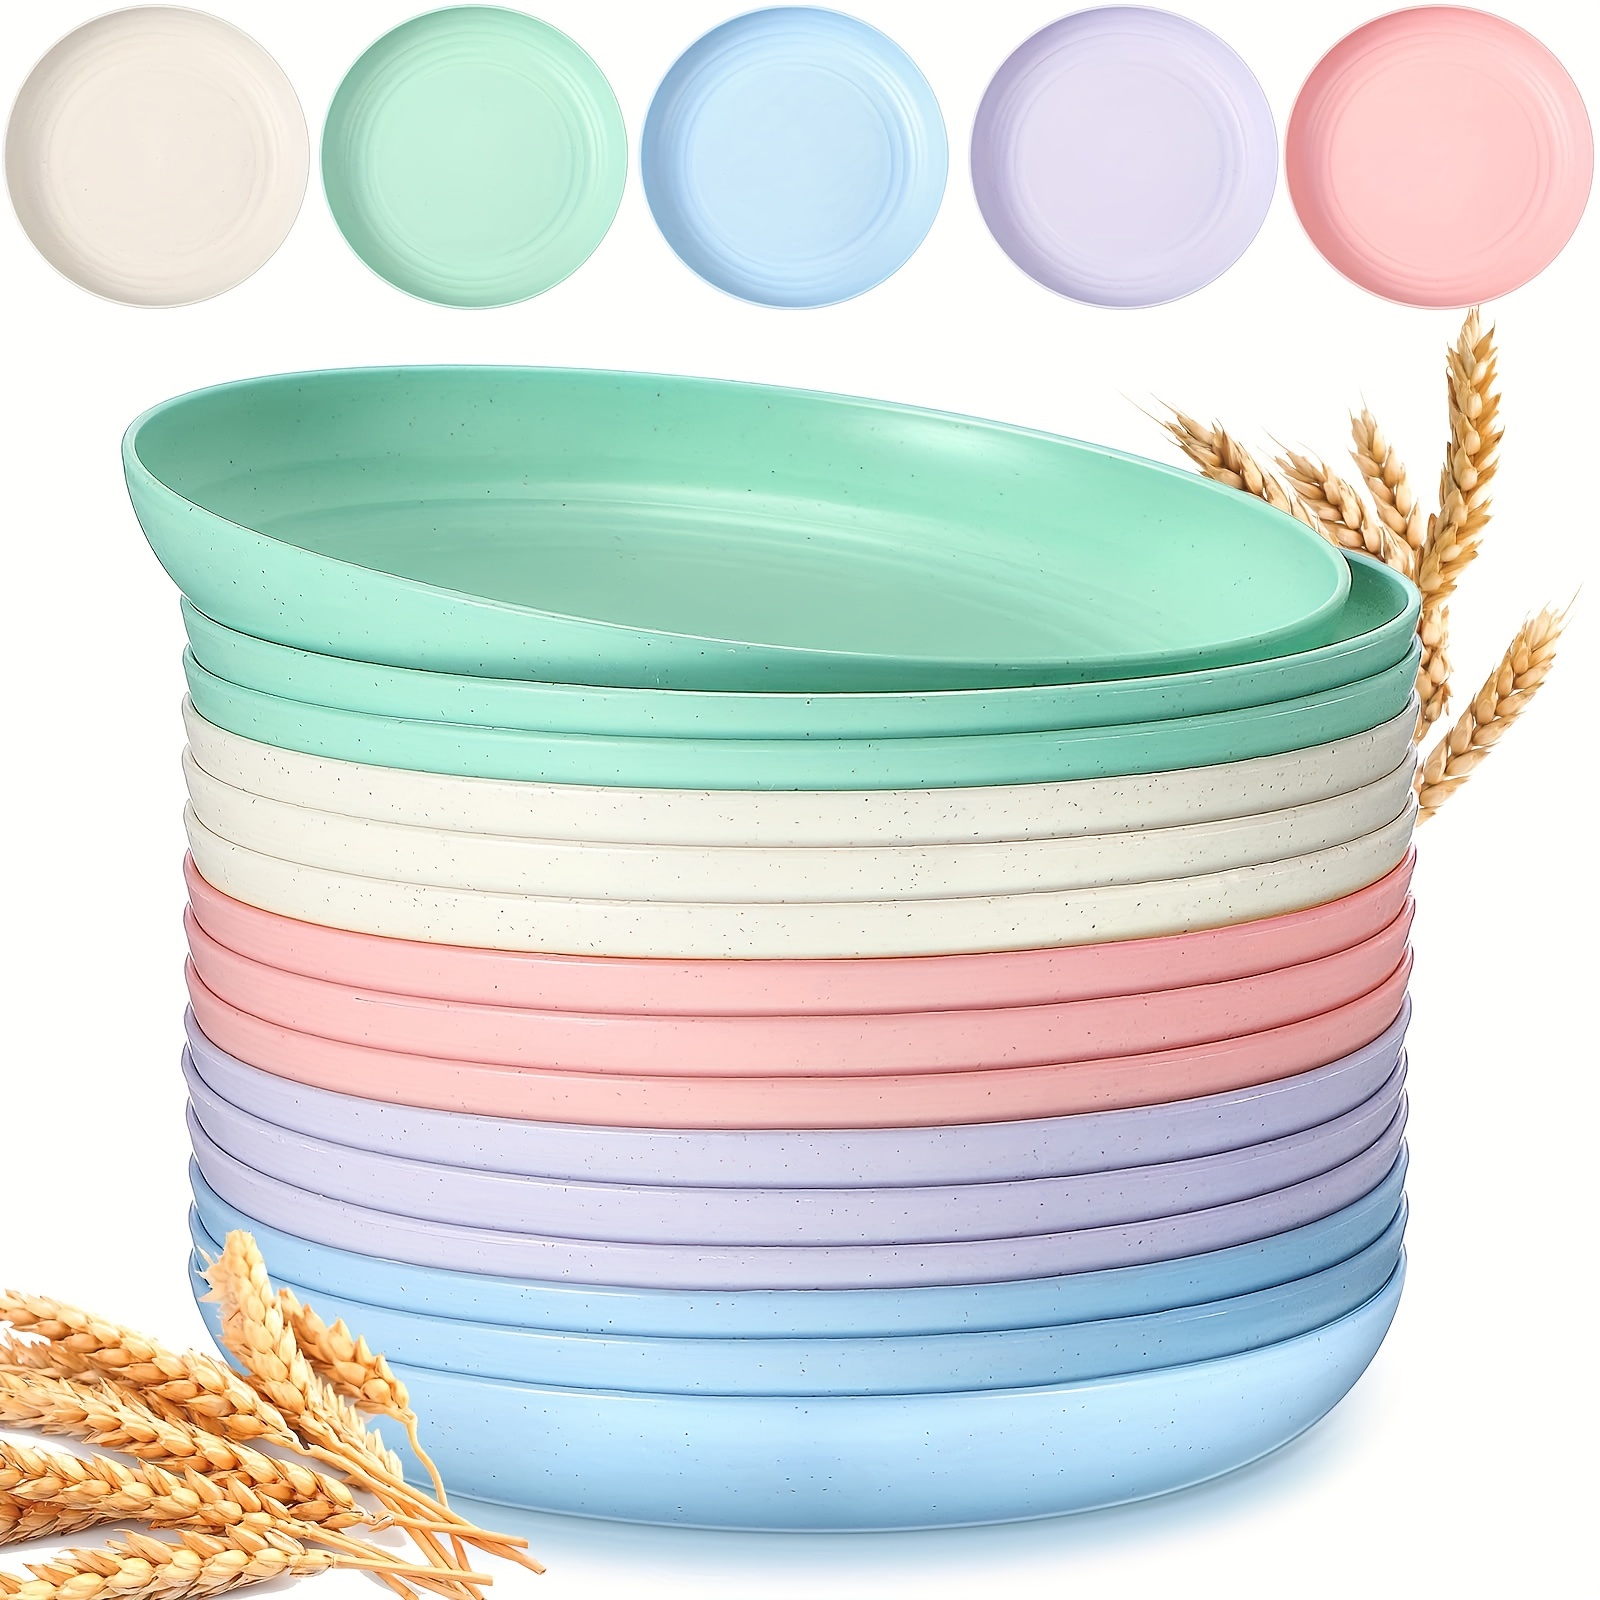 

5pcs 9 Inch Colors Plastic Dinner Plates, Reusable And Sturdy Unbreakable Dishes Set For Pasta Bowls, Ramen, Drop Resistant, Bpa Free Dinnerware Microwave Safe Dishwasher Safe